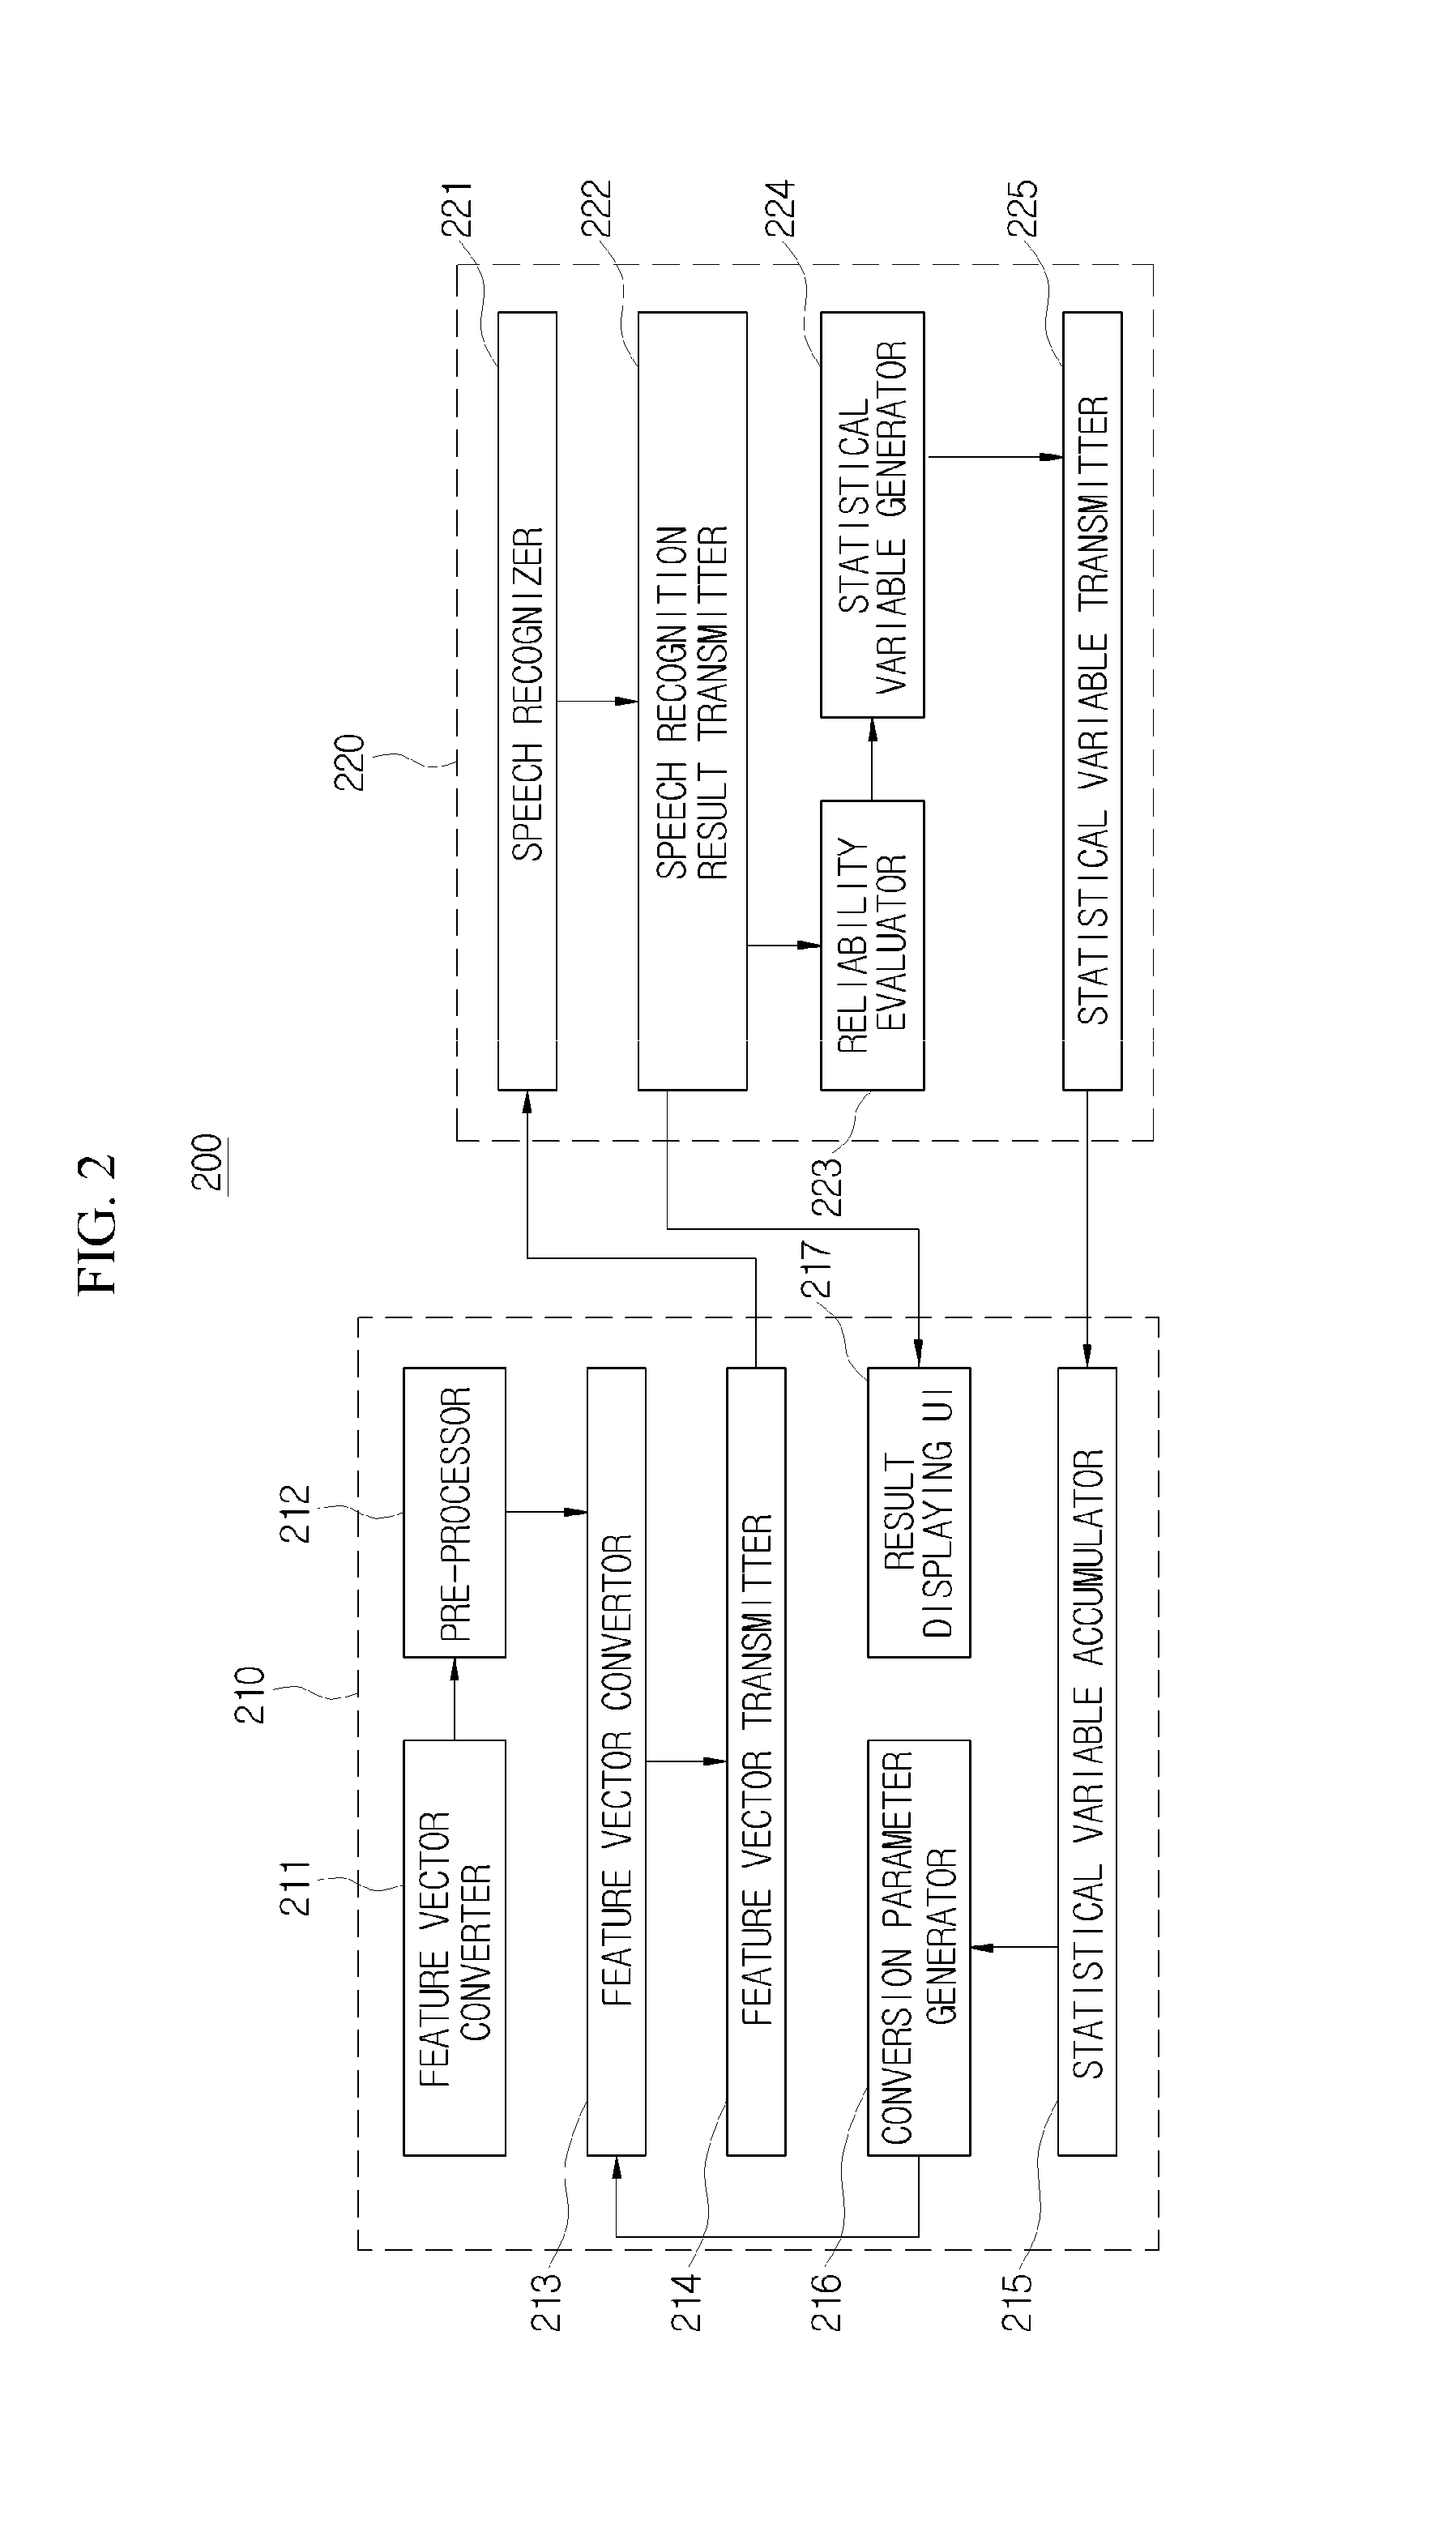 Terminal and server of speaker-adaptation speech-recognition system and method for operating the system